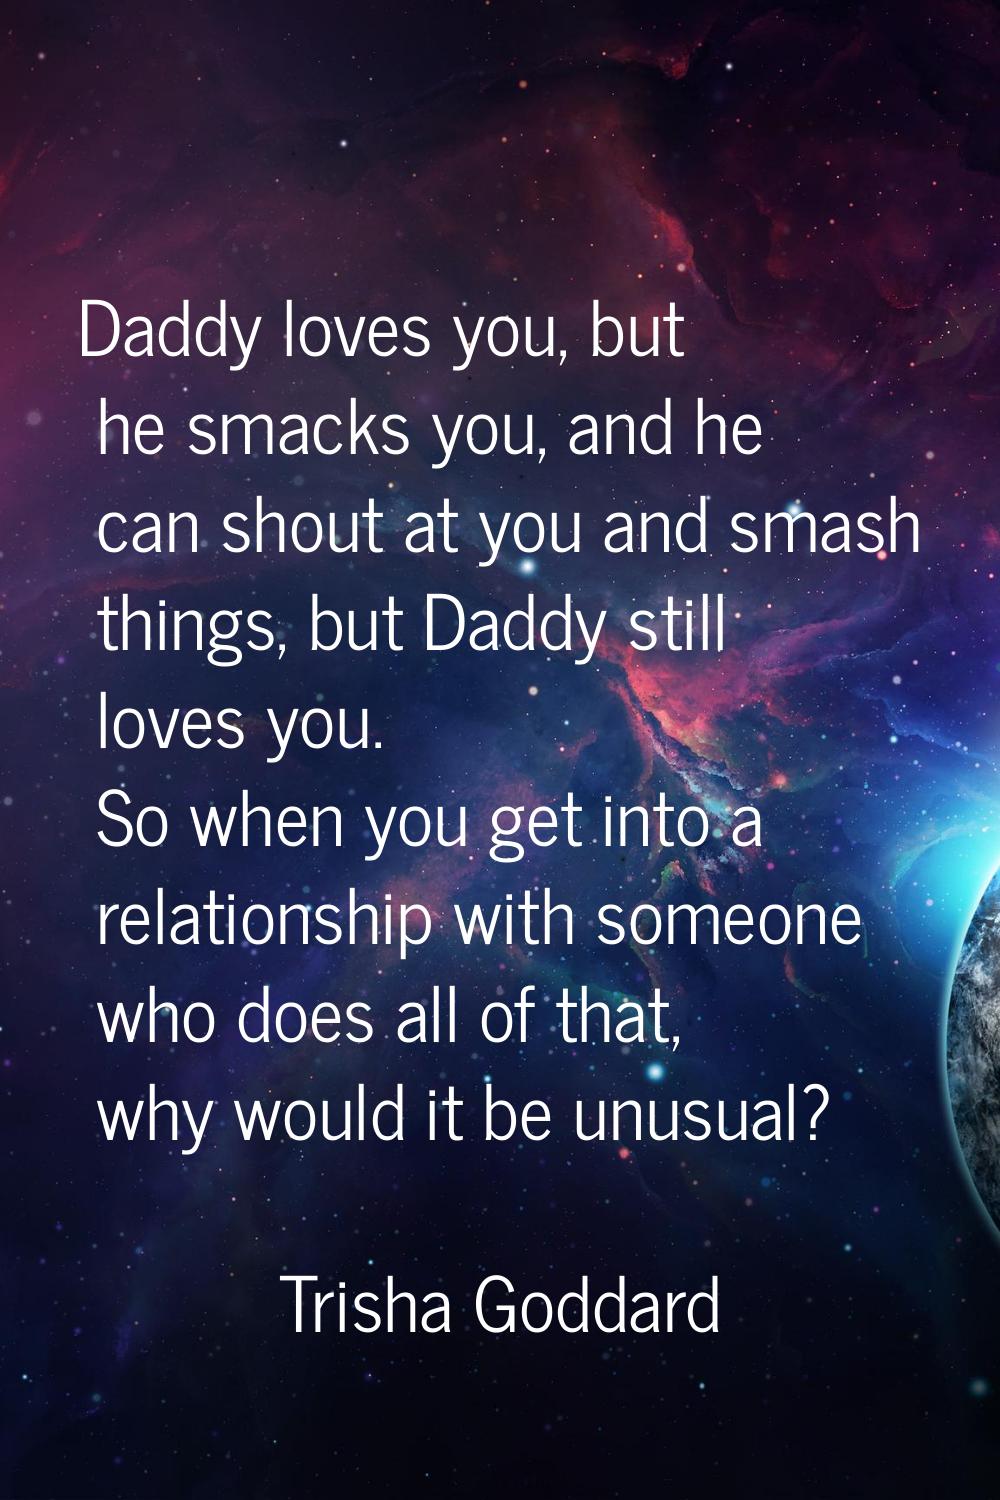 Daddy loves you, but he smacks you, and he can shout at you and smash things, but Daddy still loves